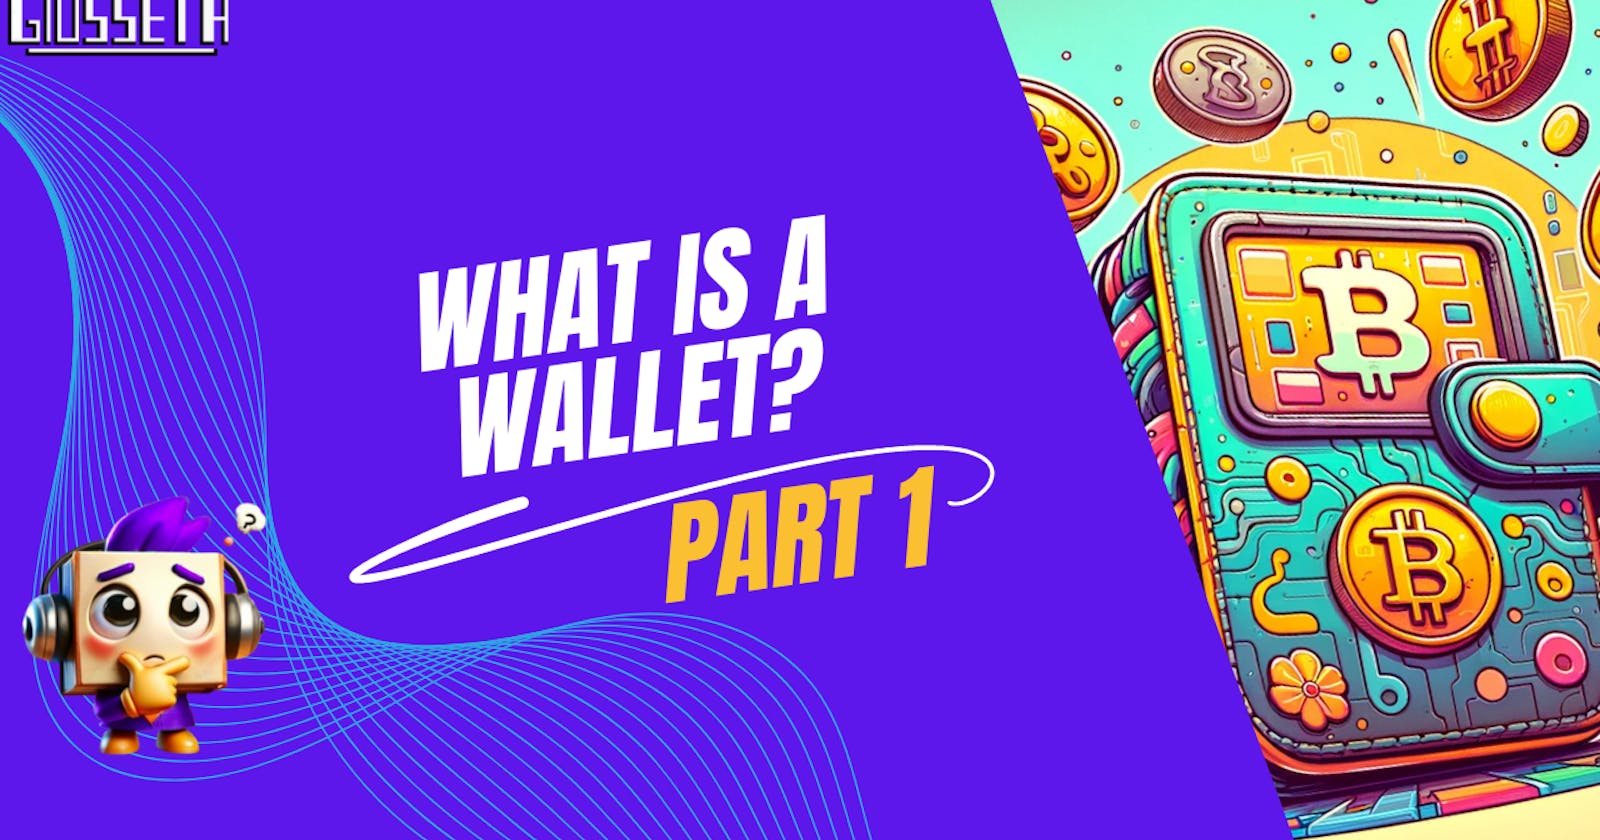 What's a Wallet Series - Part 1